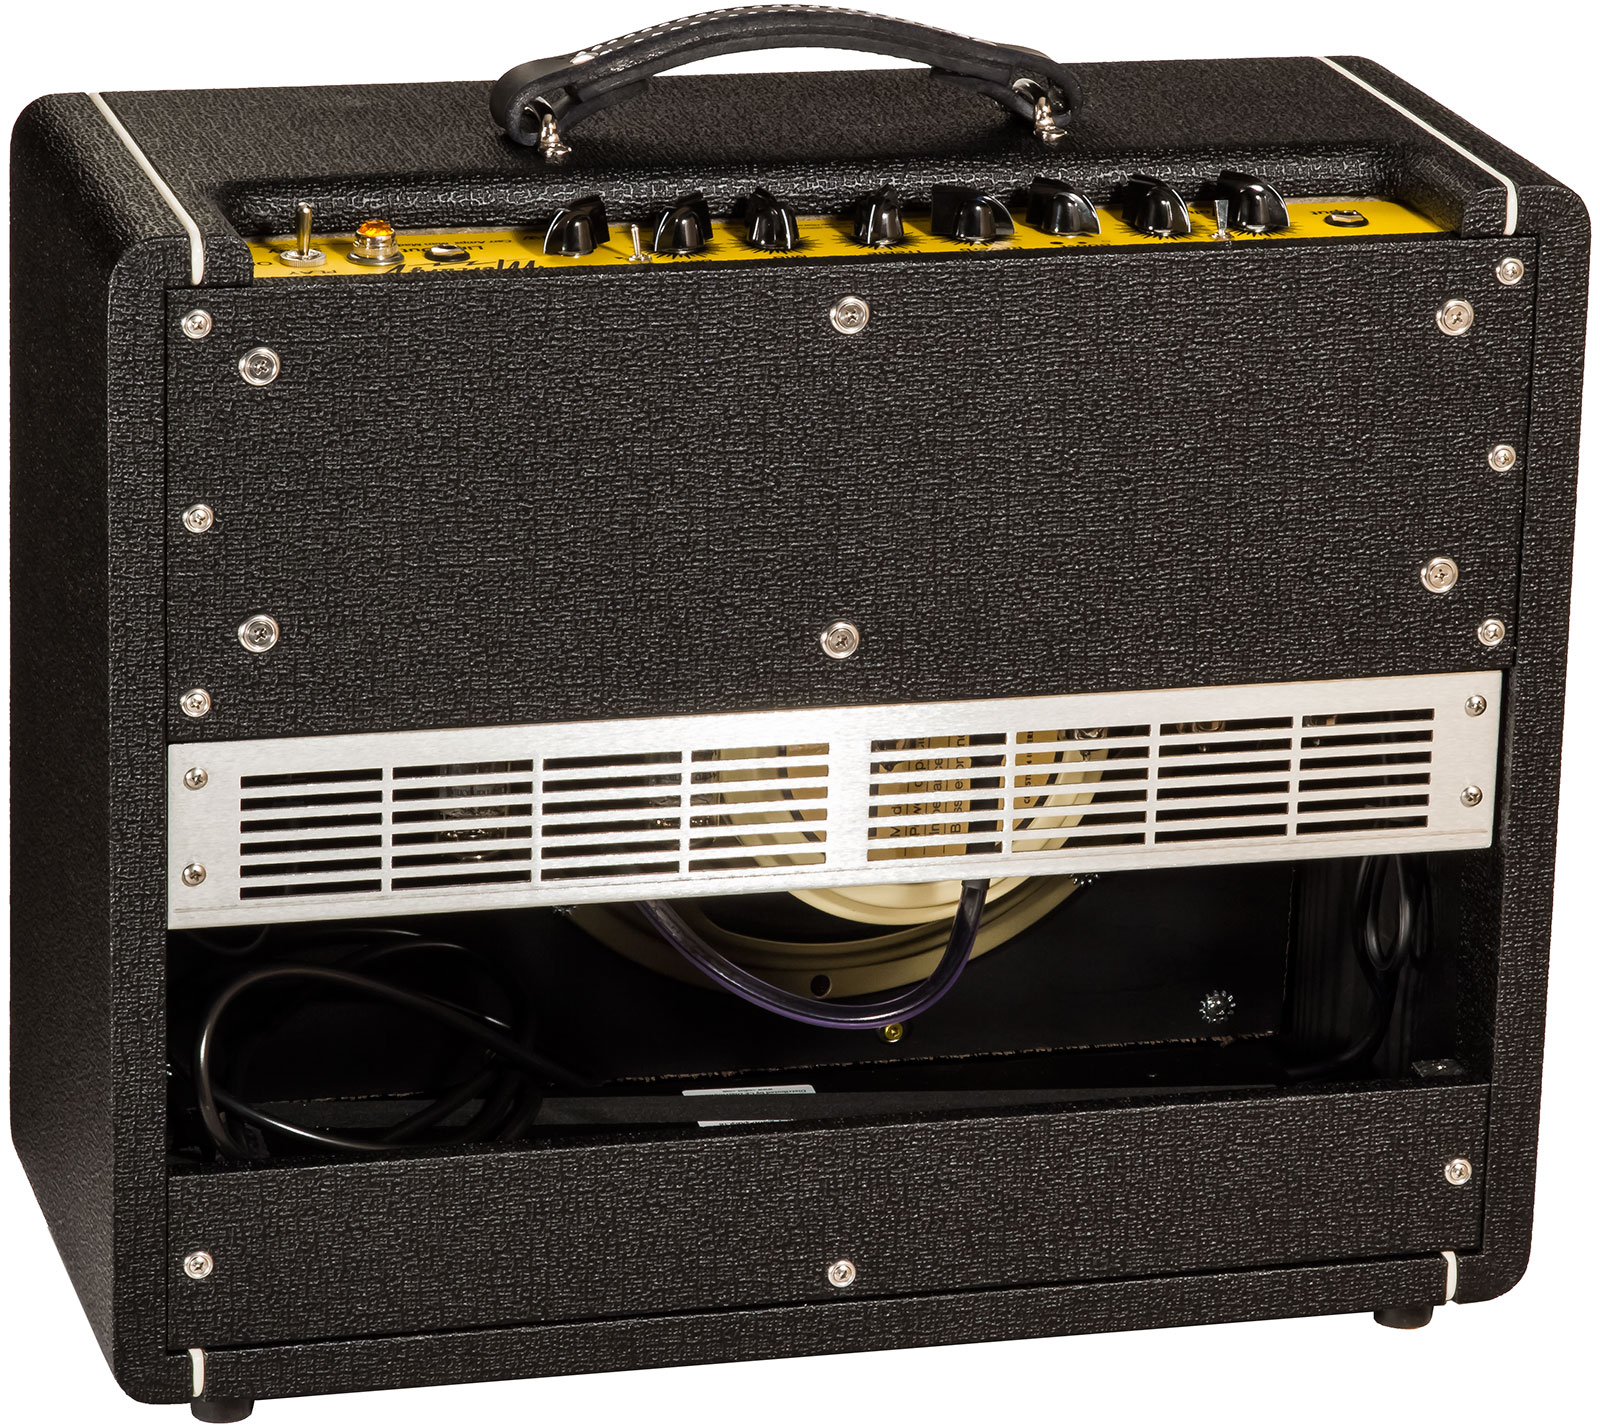 Carr Amplifiers Mercury V 1-12 Combo 16w 1x12 6v6 Black - Electric guitar combo amp - Variation 1